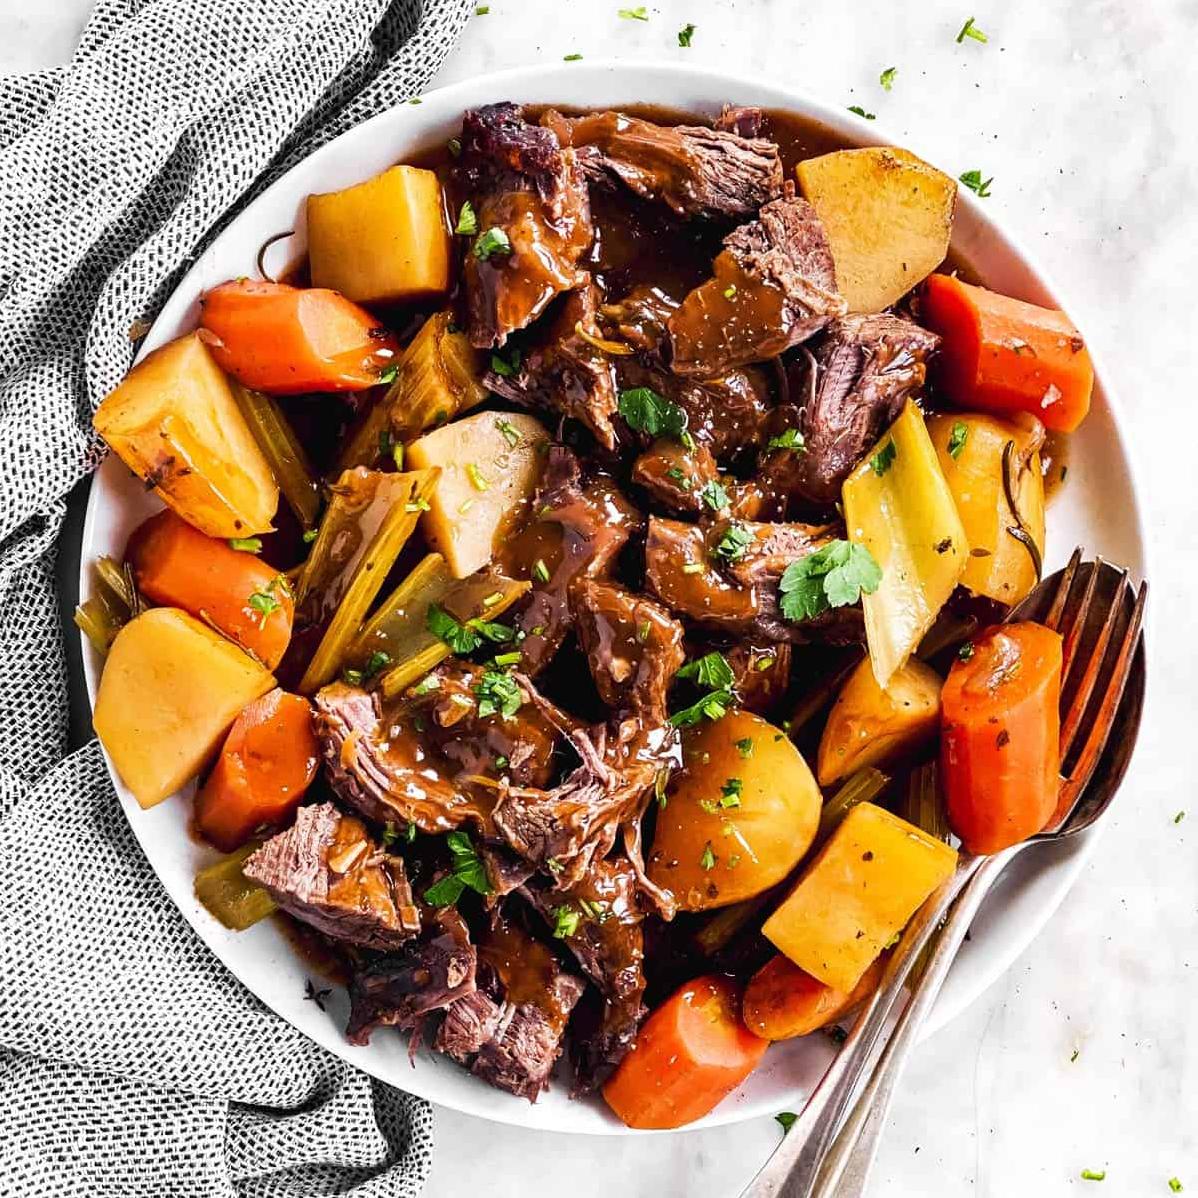  The slow cooker does all the work for you in this recipe.